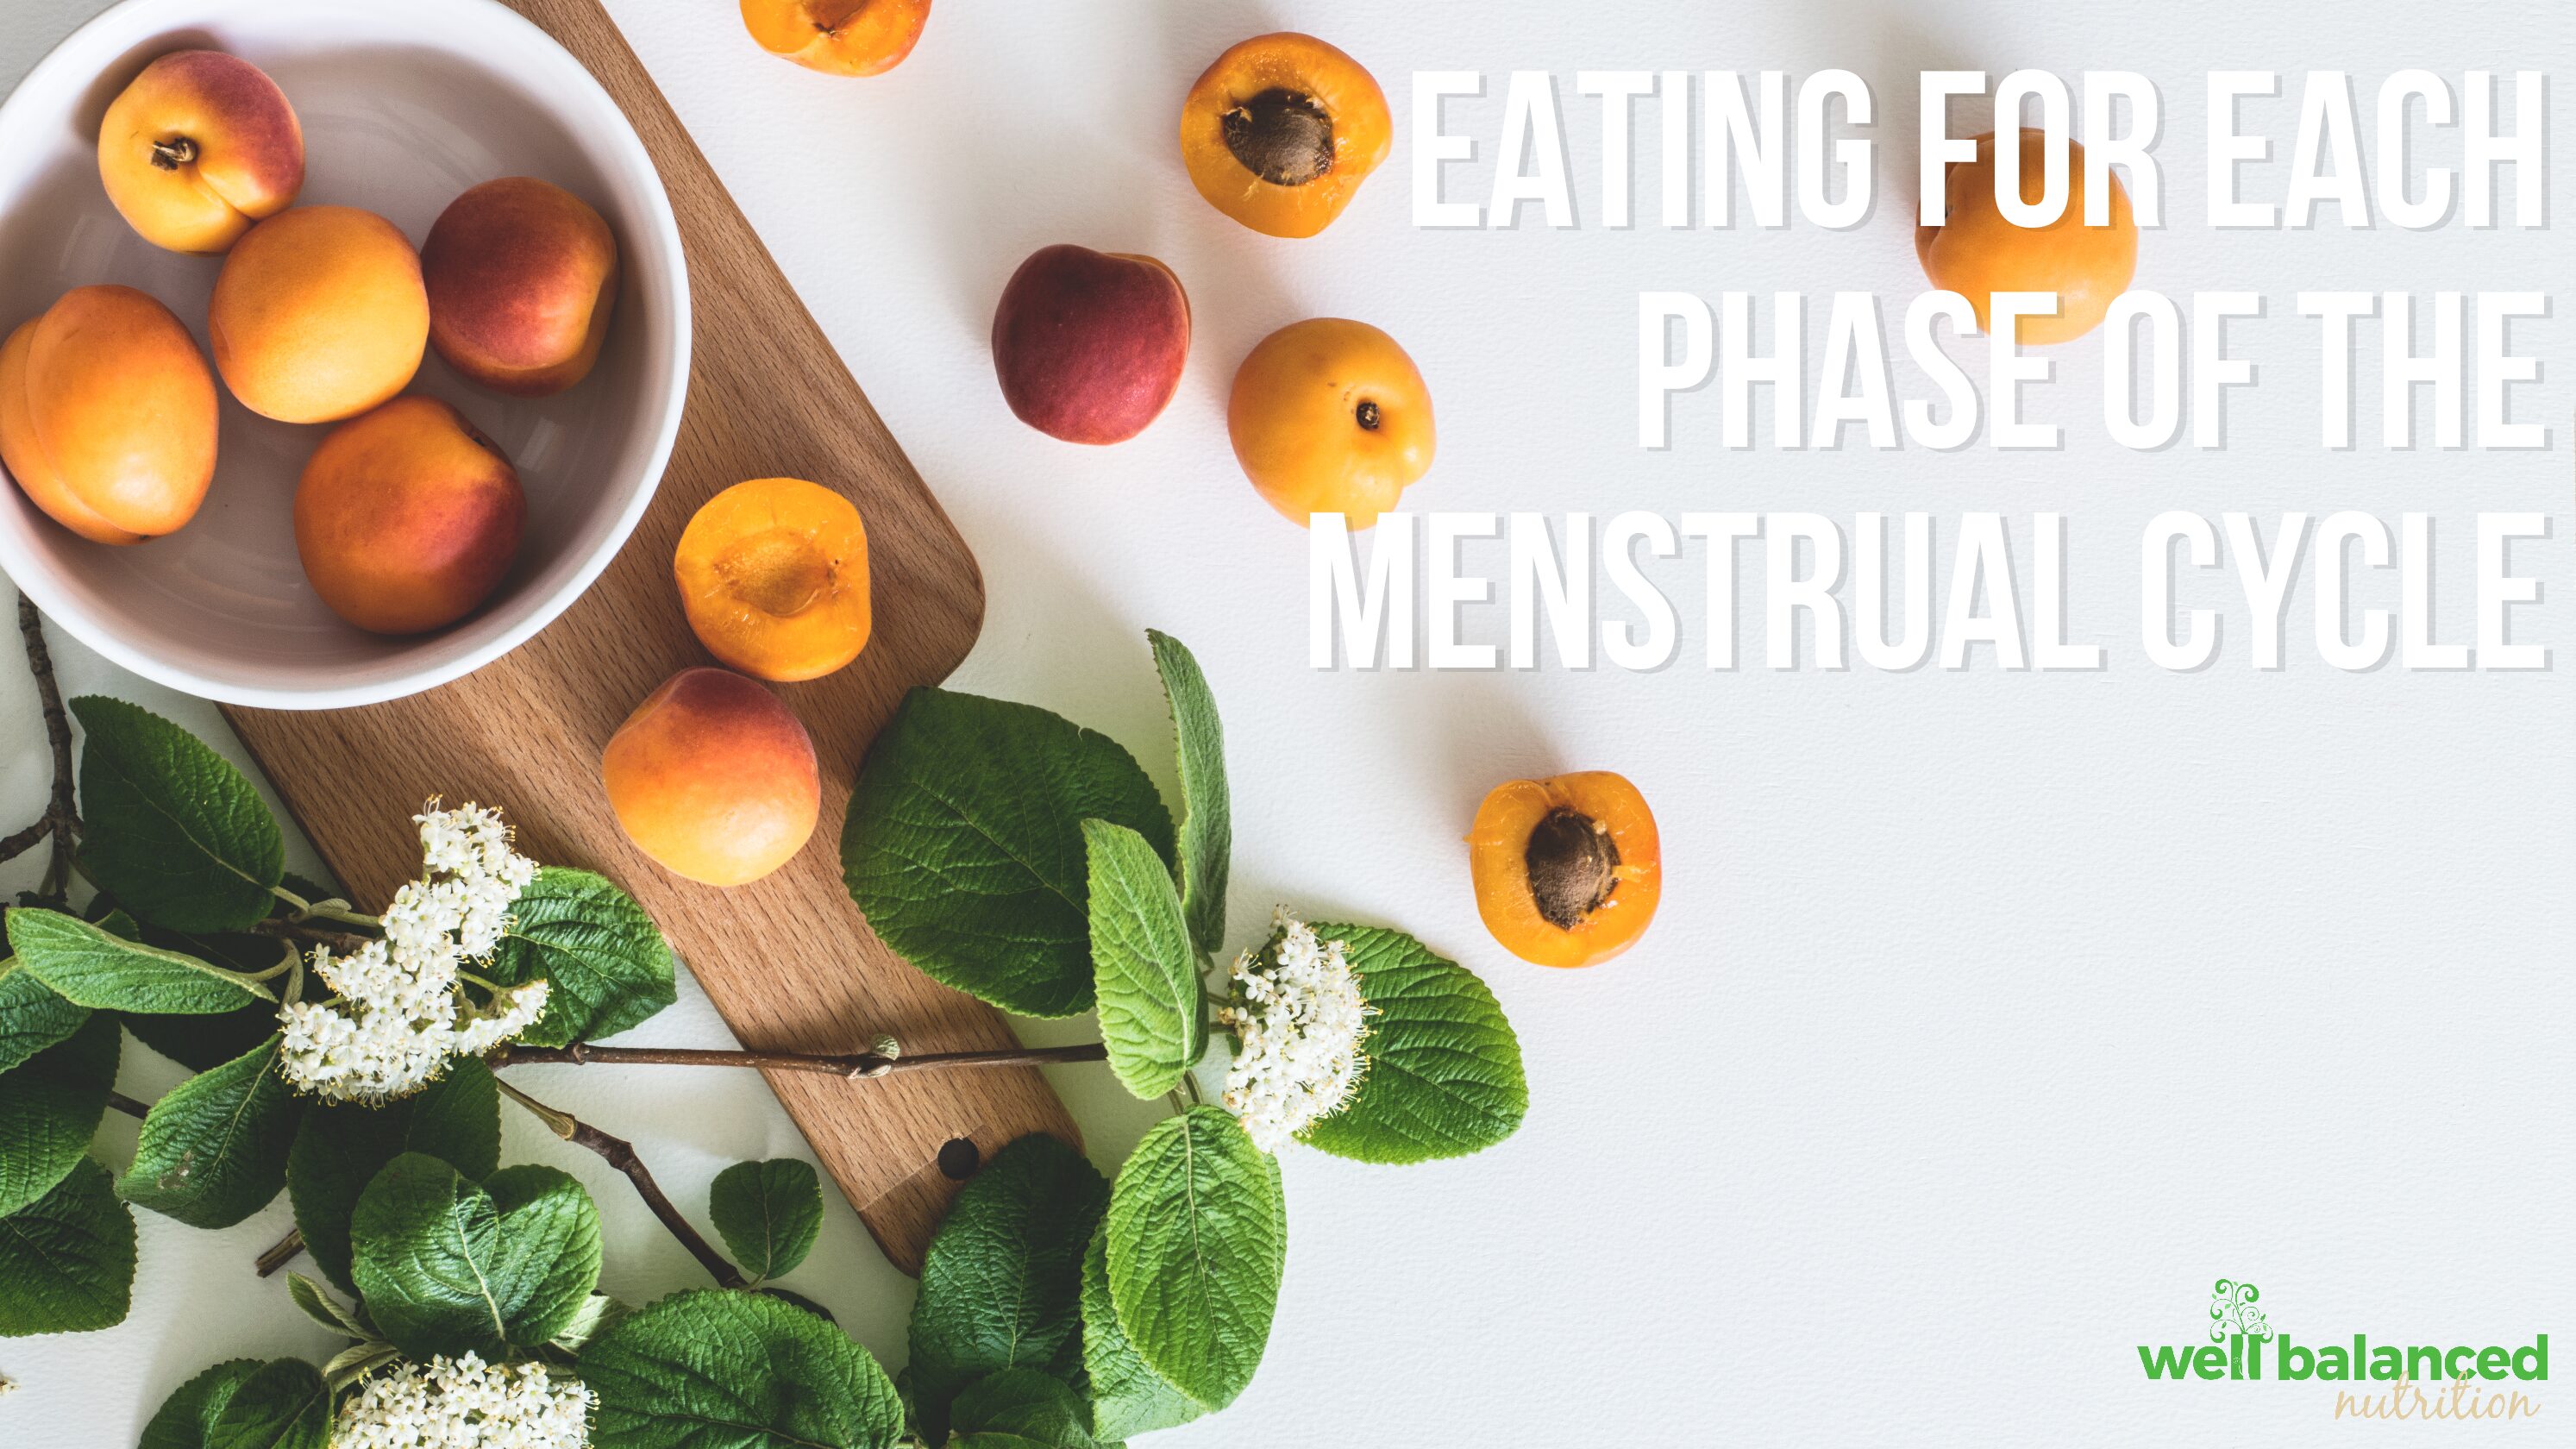 Eating for Each Phase of the Menstrual Cycle 